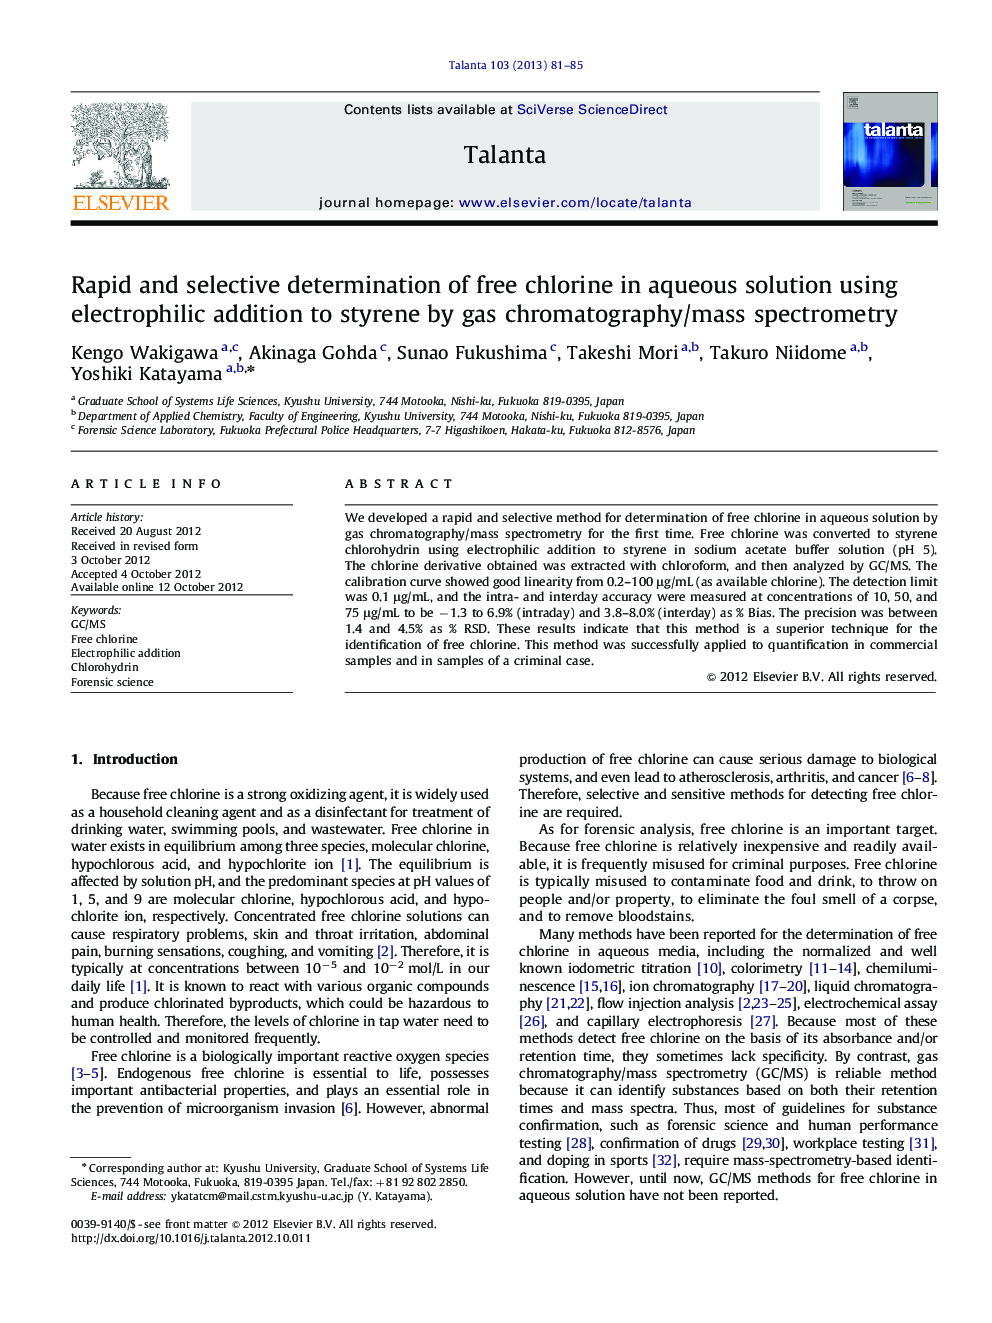 Rapid and selective determination of free chlorine in aqueous solution using electrophilic addition to styrene by gas chromatography/mass spectrometry